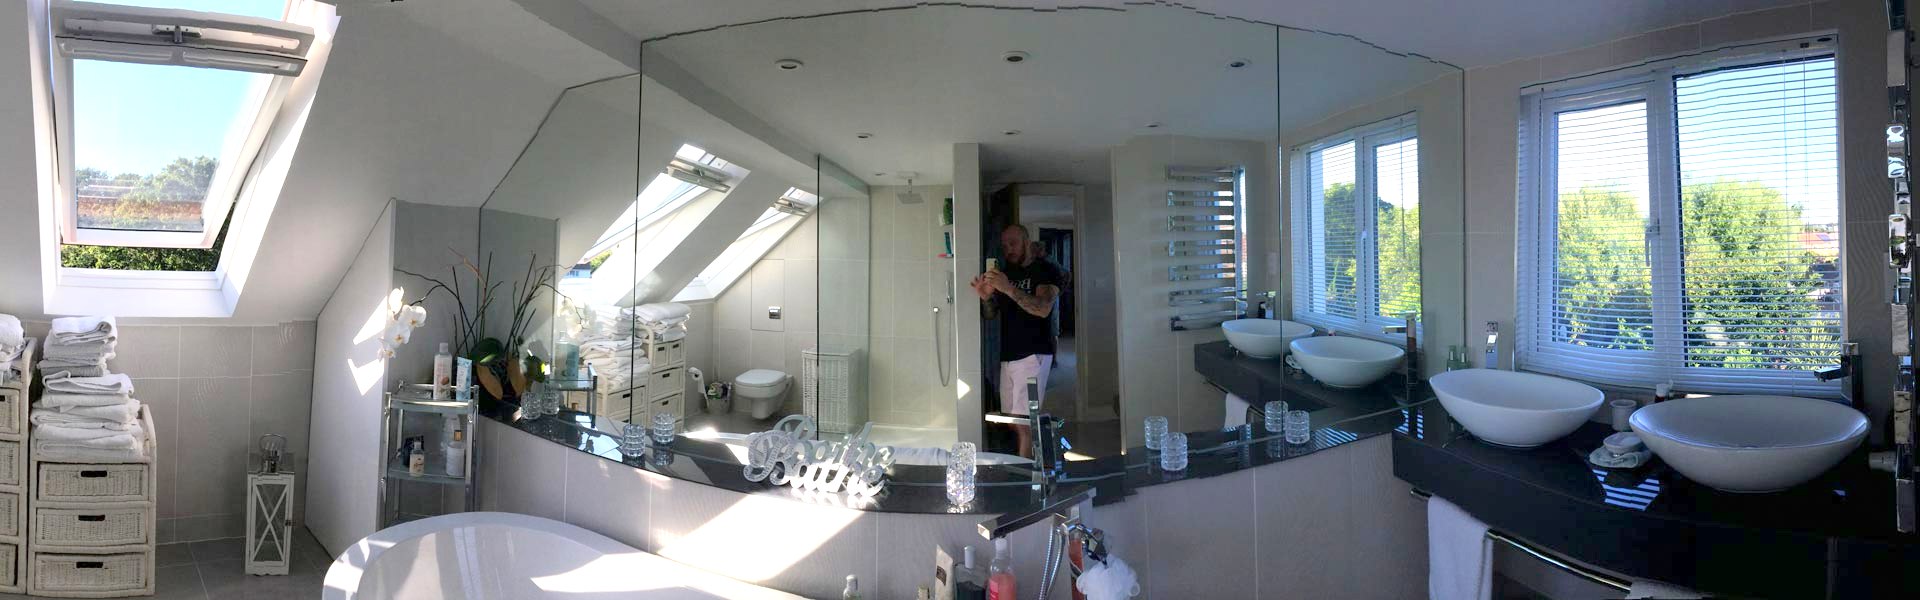 Loft Conversion with Bathroom by Total Loft Conversions